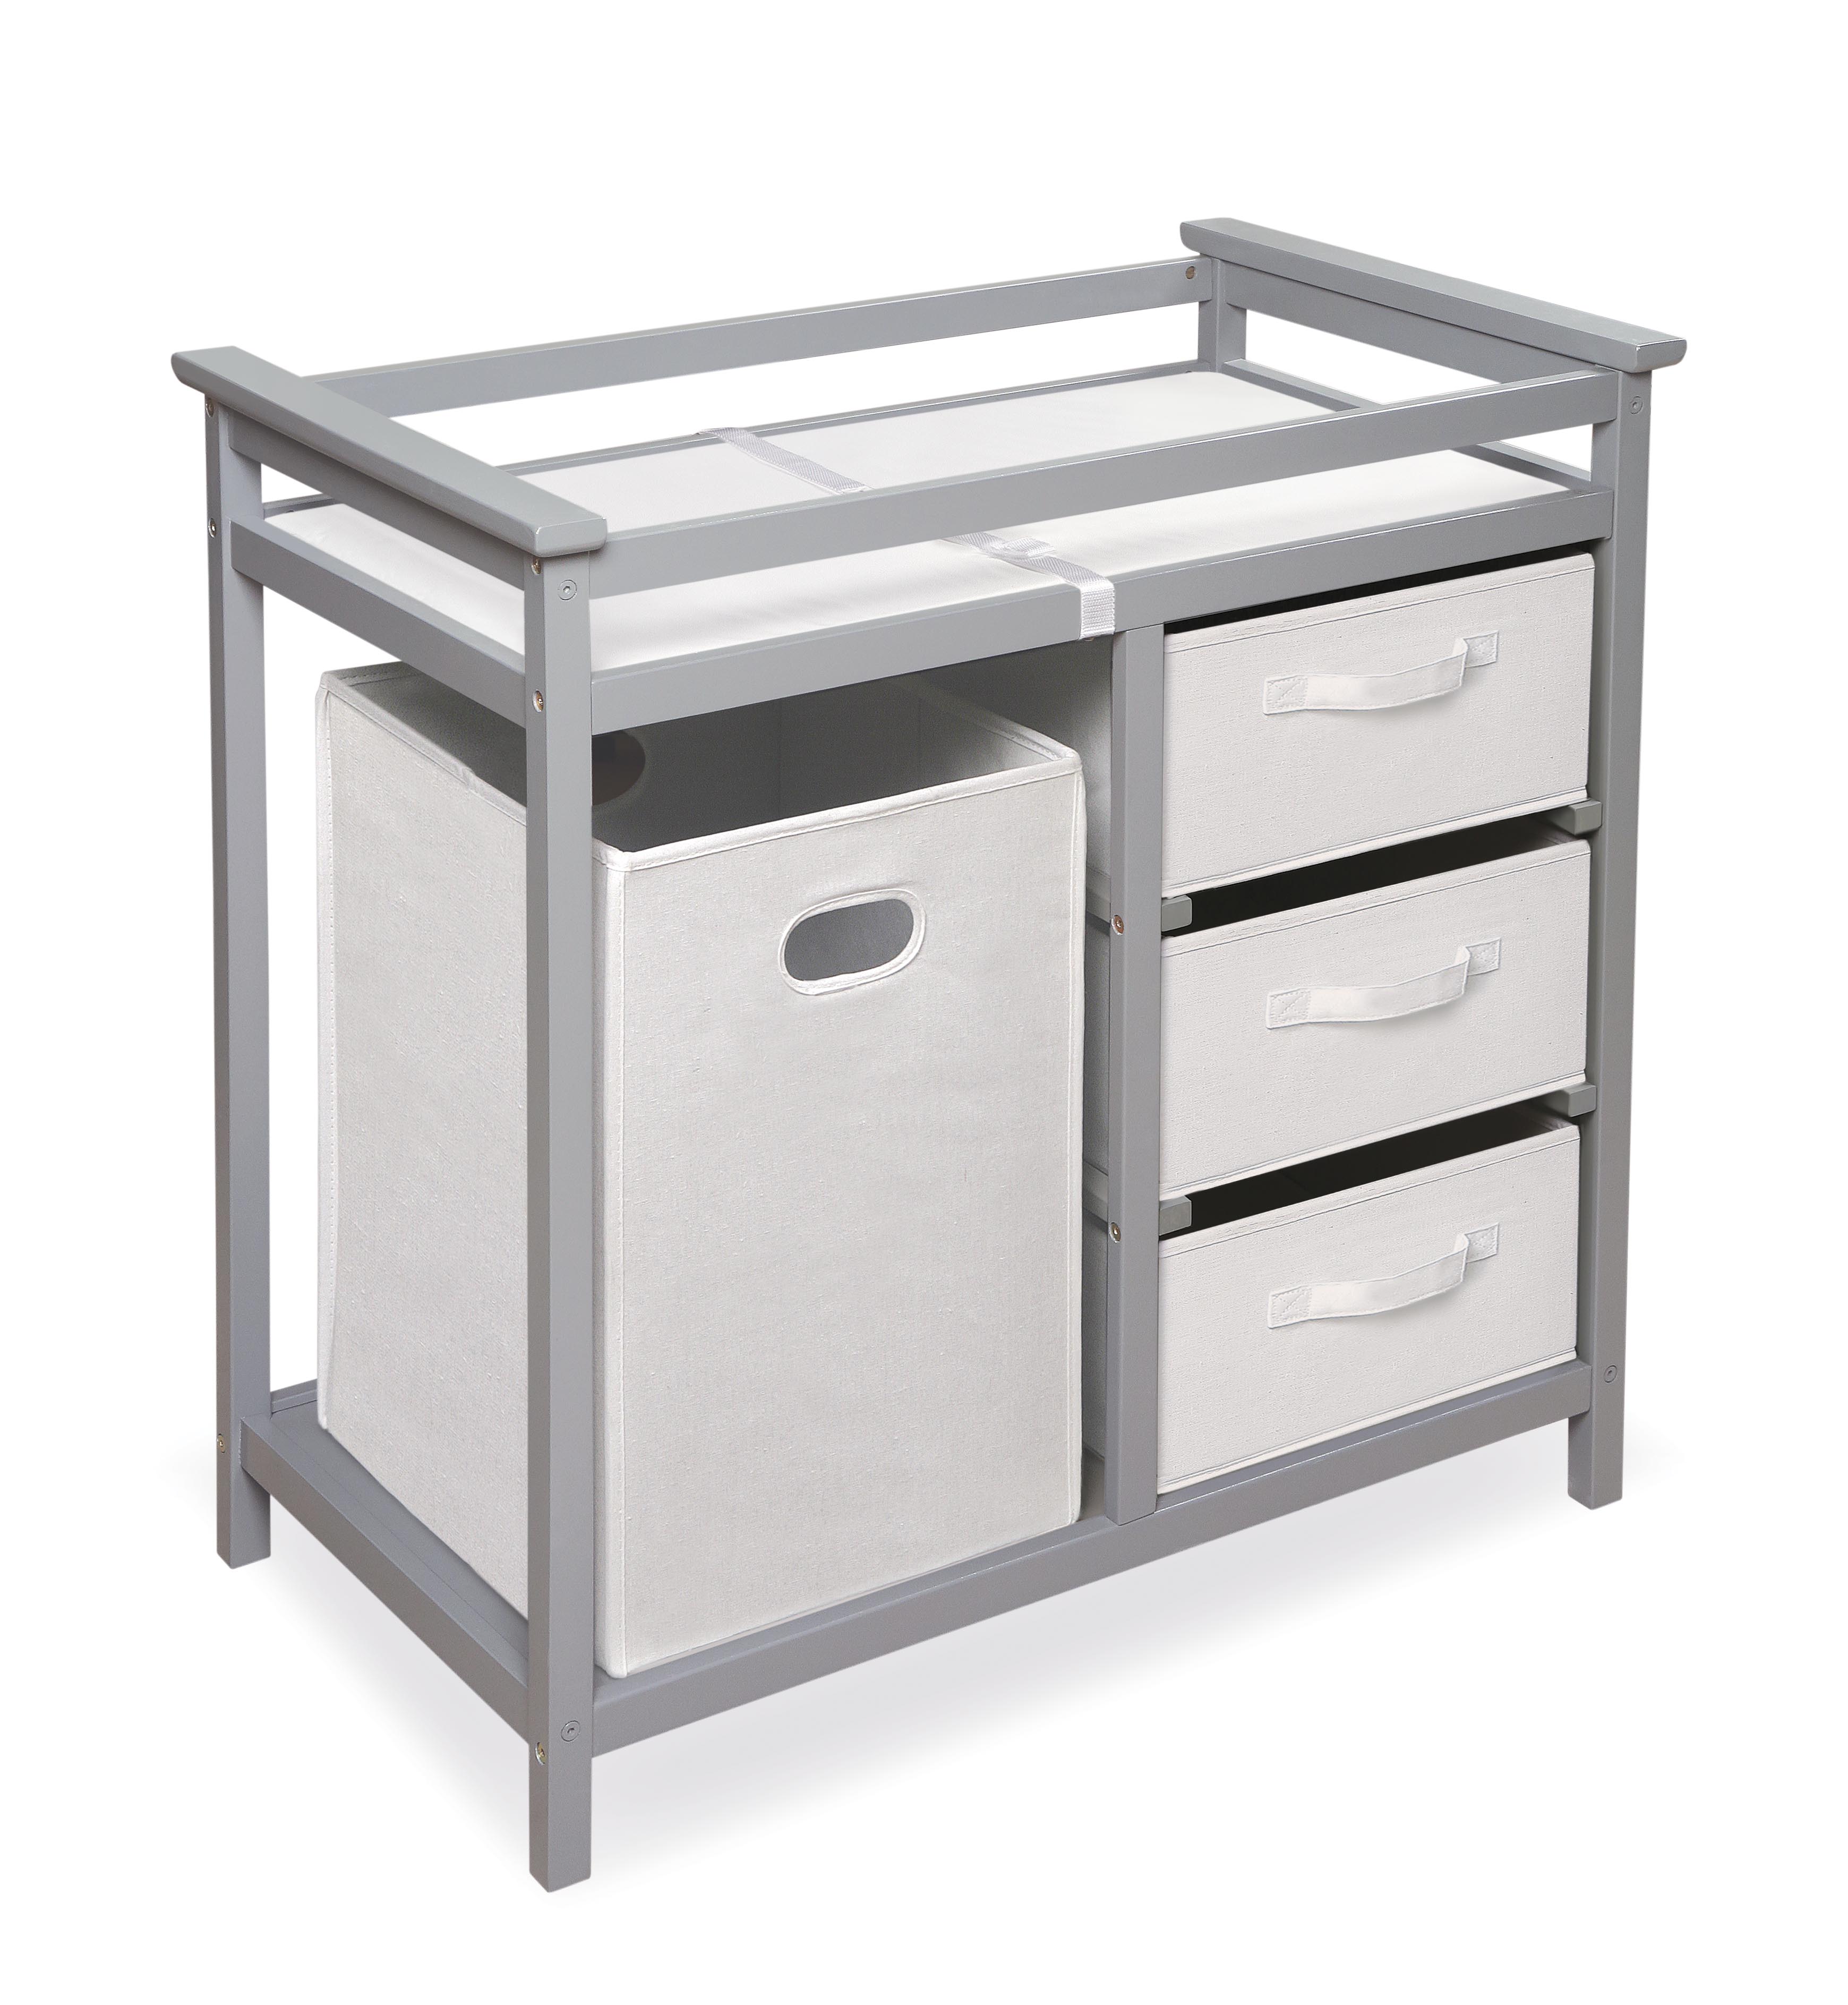 Modern Baby Changing Table with Hamper and 3 Baskets - Gray